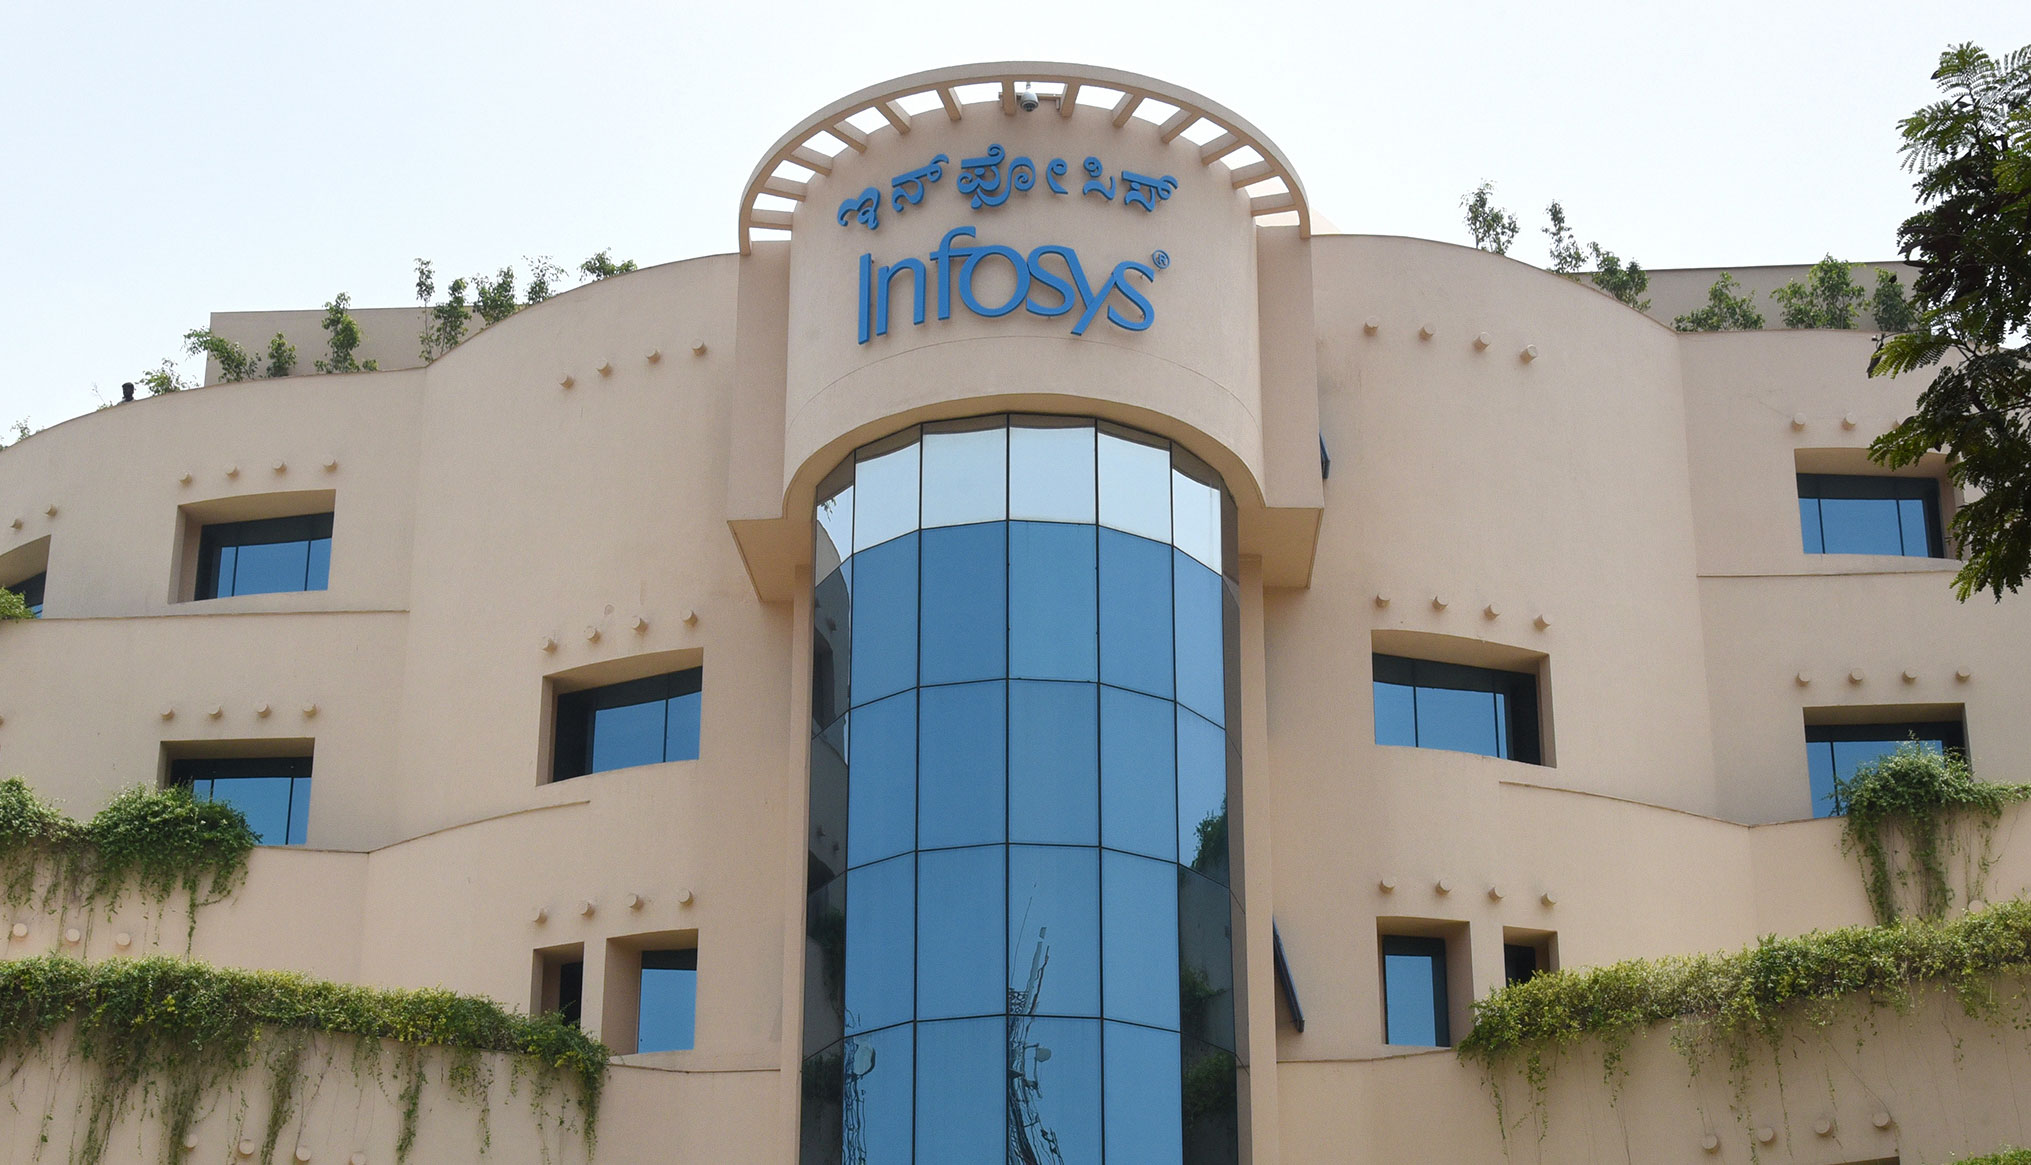 Infosys Off Campus Drive | Systems Engineer | Apply here!